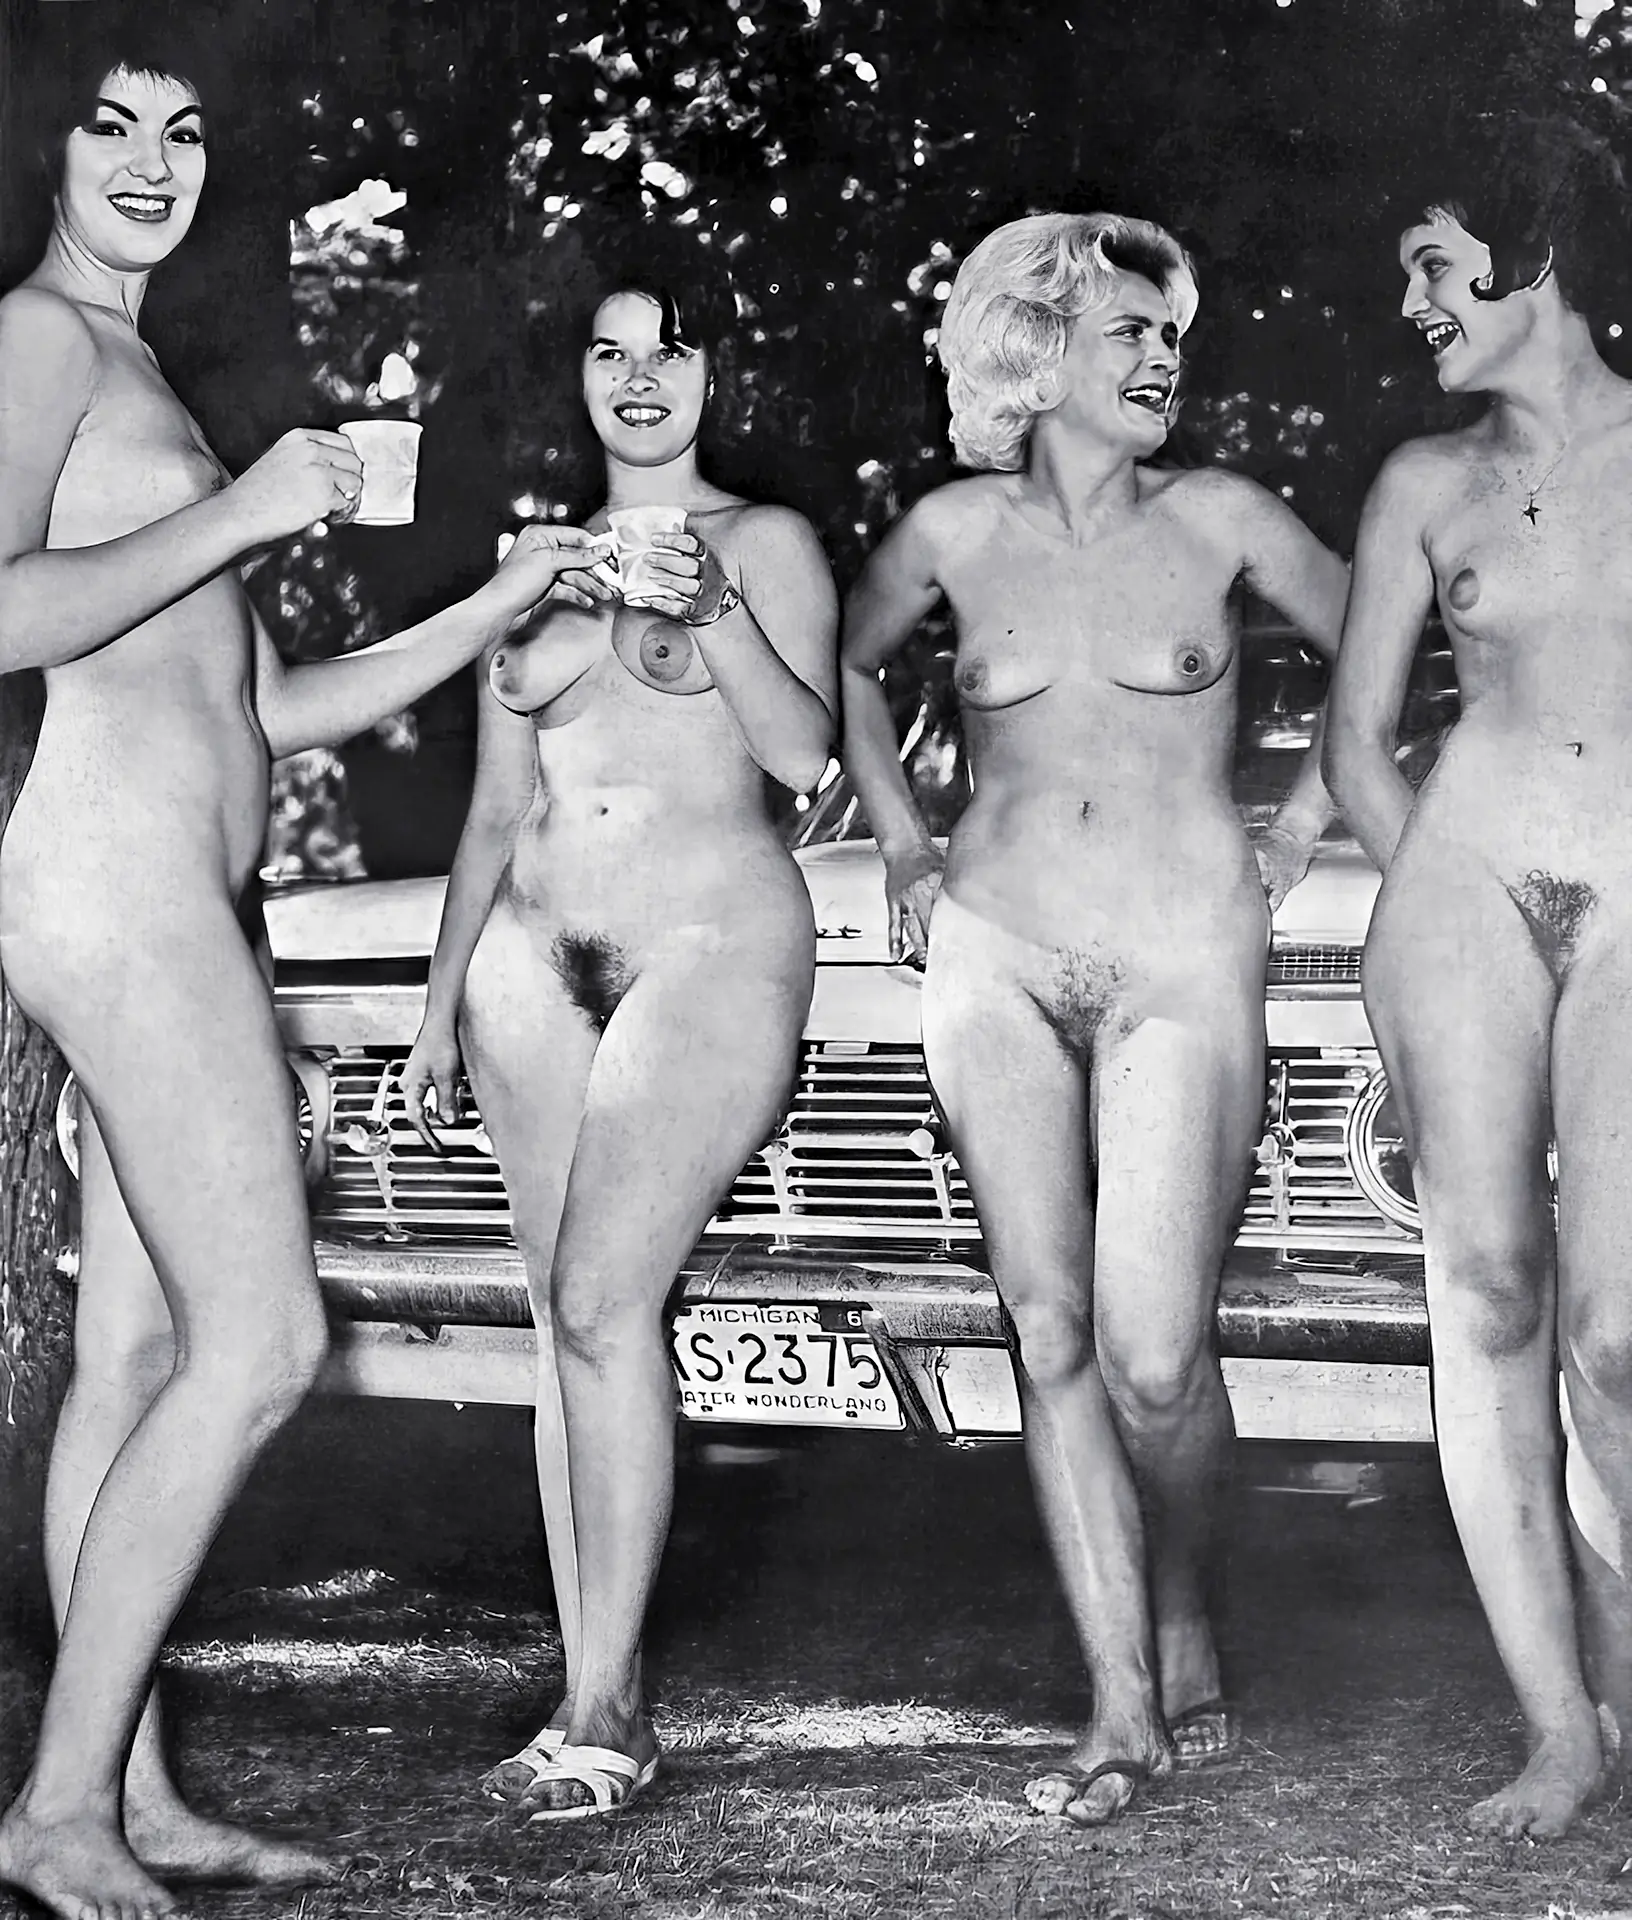 Vintage nudist porn photos with four completely nude naturist women with hairy pussies standing next to a car and talking